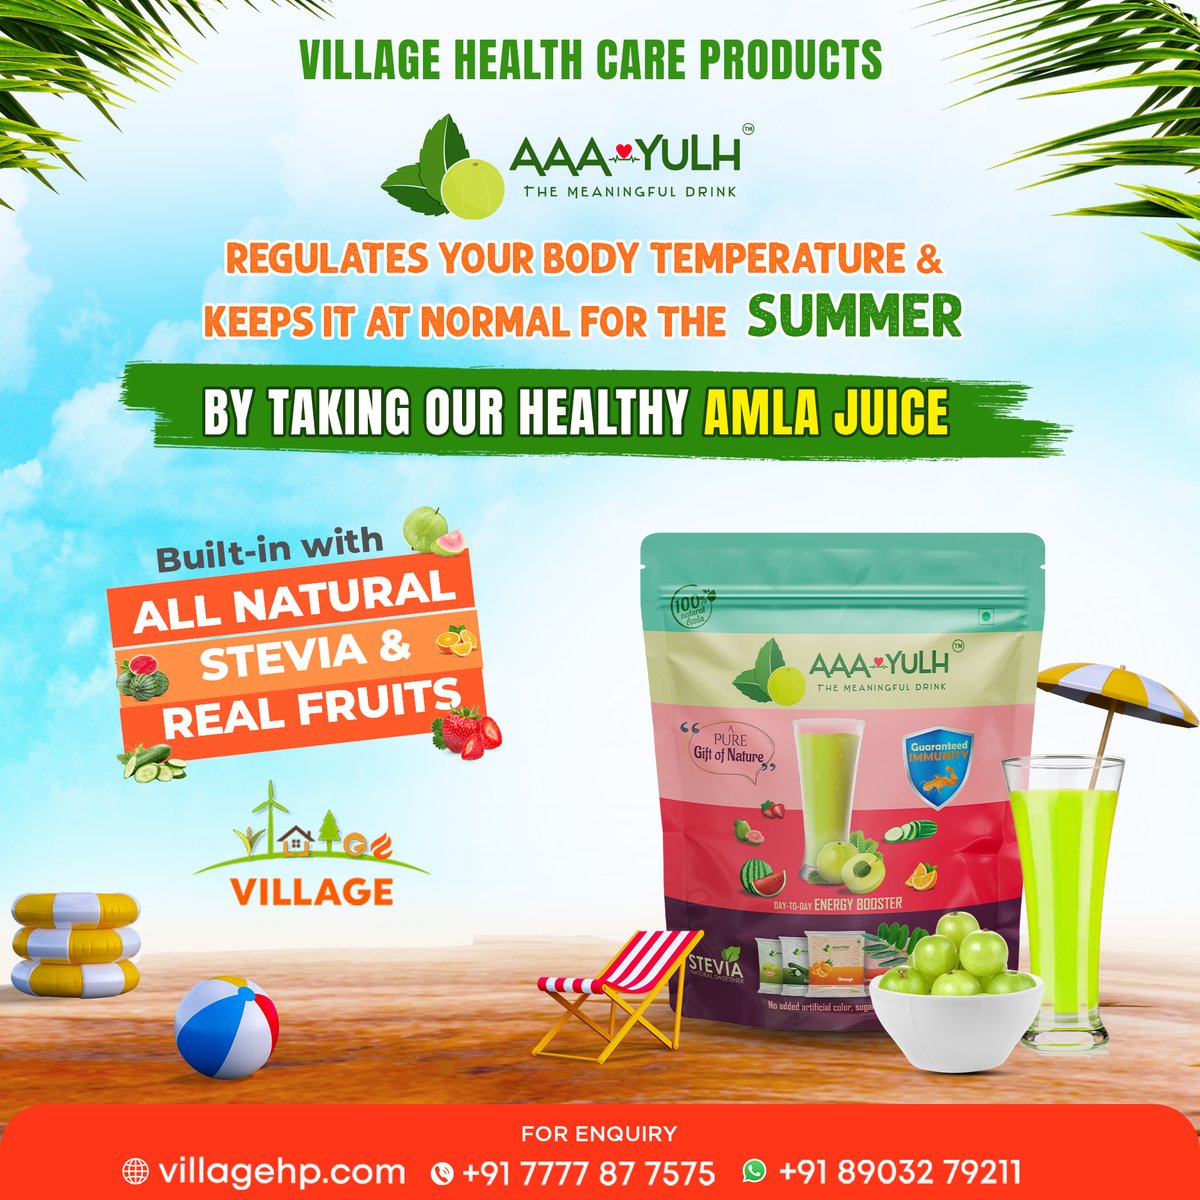 Keep your body cool and your temperature stable during summer with healthy gooseberry juice.
To Place an Order Call: +91 7777 87 7575
Contact via WhatsApp: +91 89032 79211
#Aayulh #VillageHealthCareProducts #HealthCareProducts